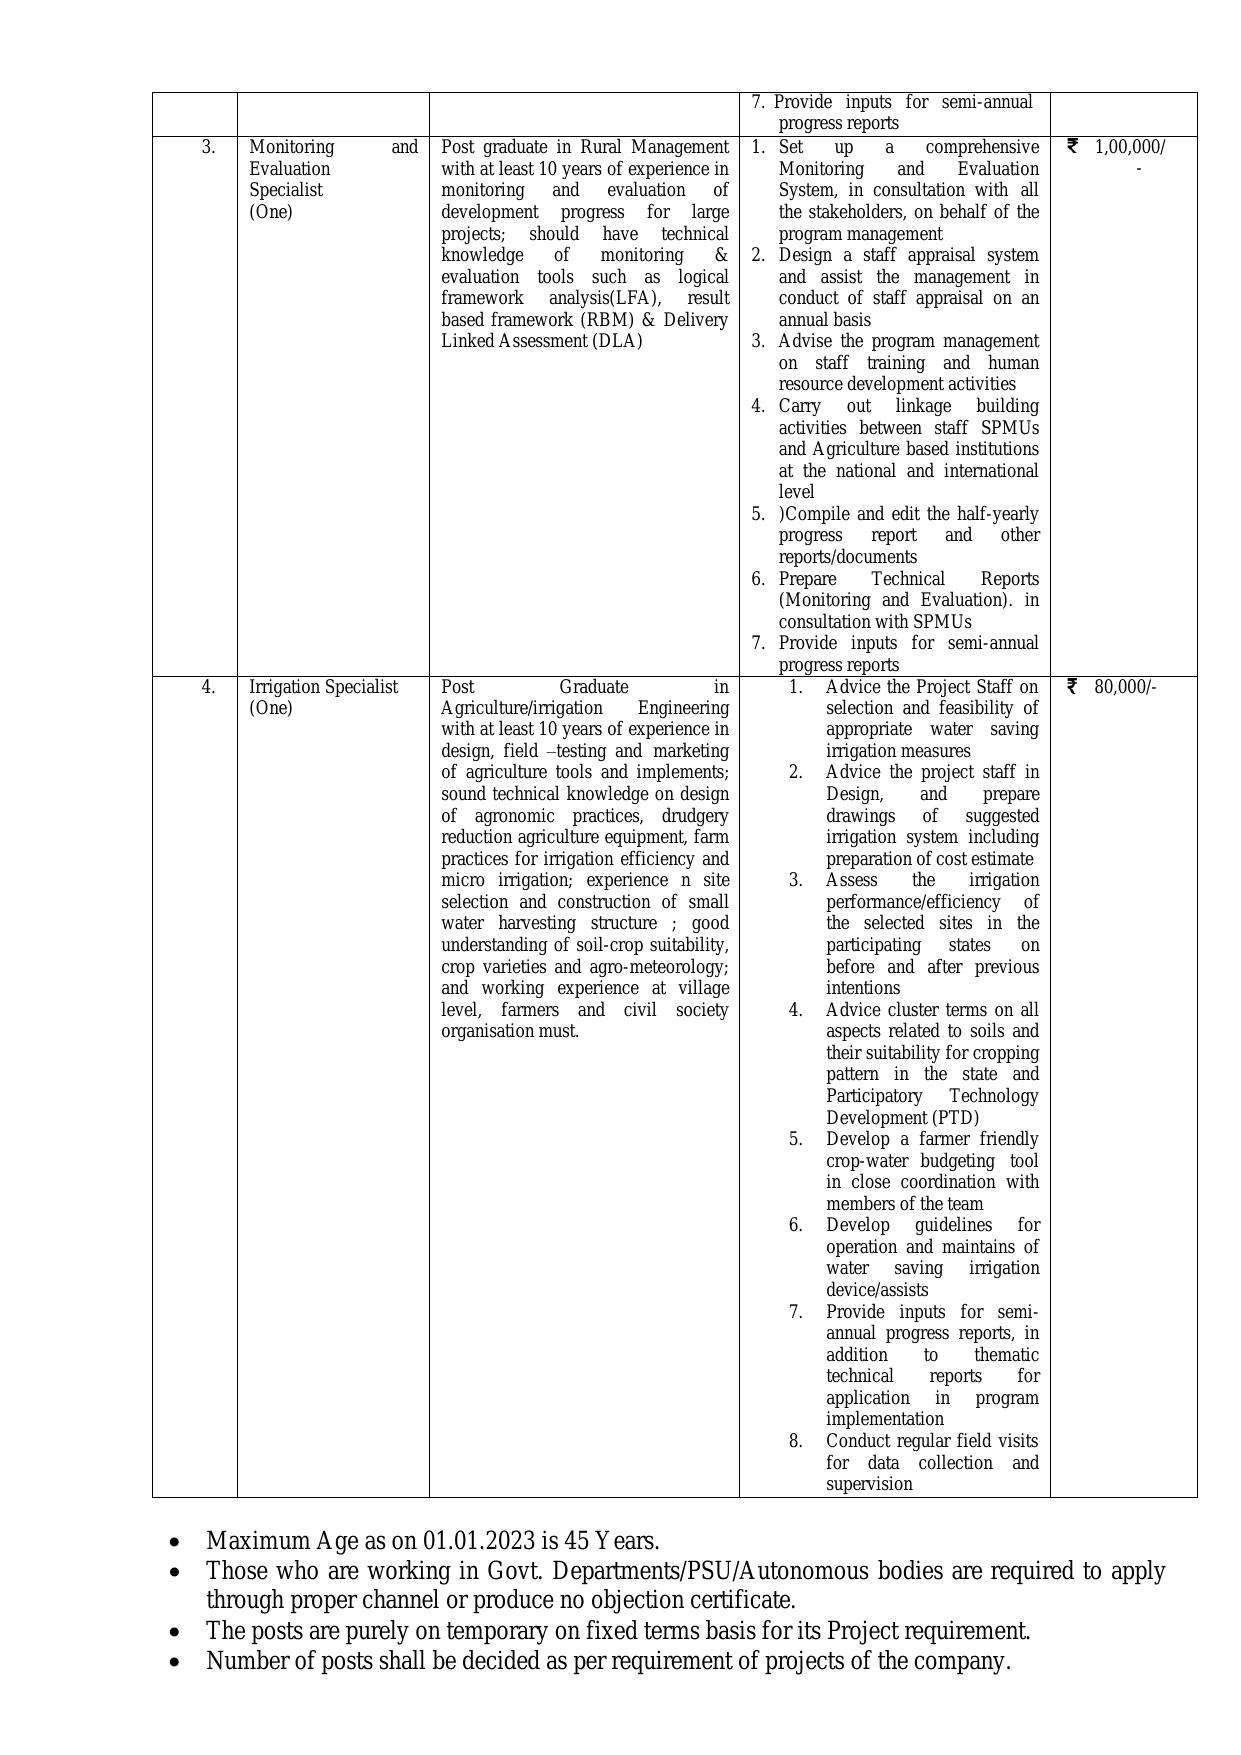 WAPCOS Limited Invites Application for Irrigation Specialist and Various Posts Recruitment 2023 - Page 1